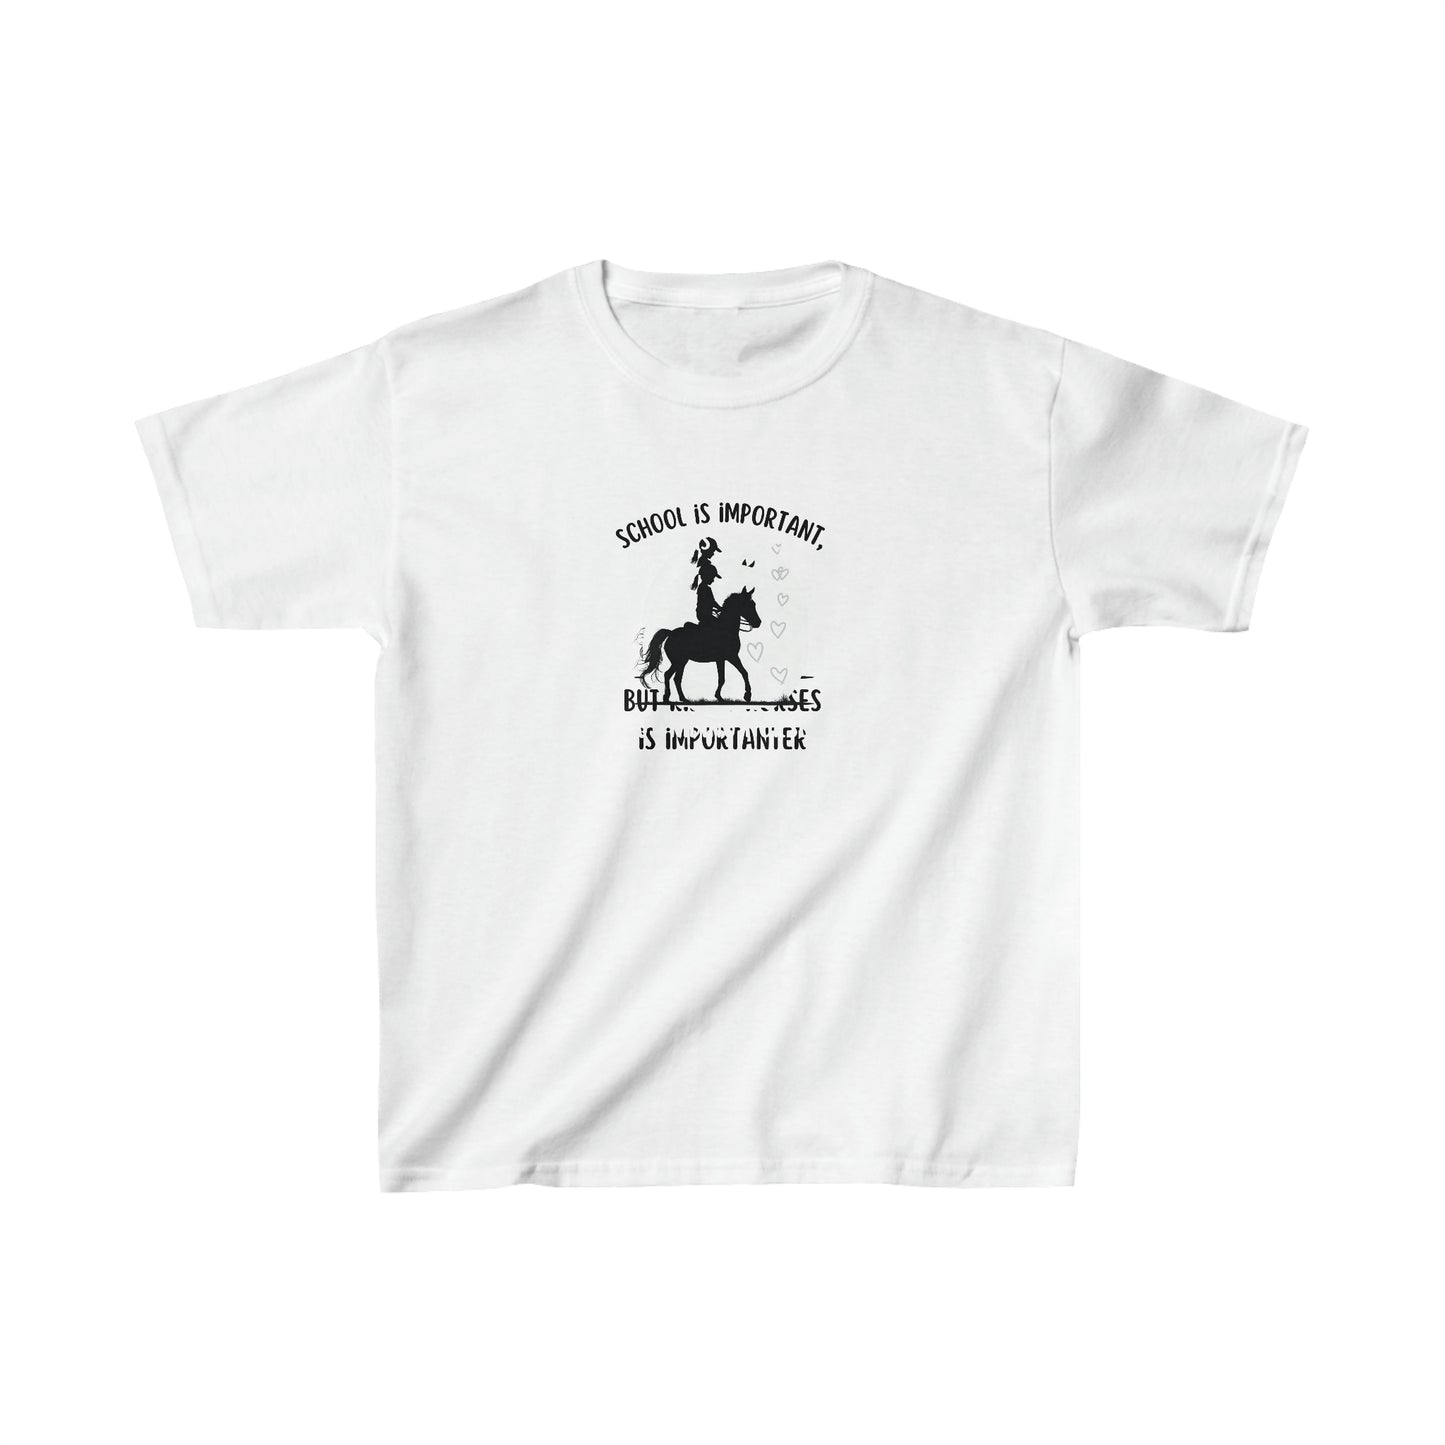 School is important, but riding horses is importanter kids' T-shirt